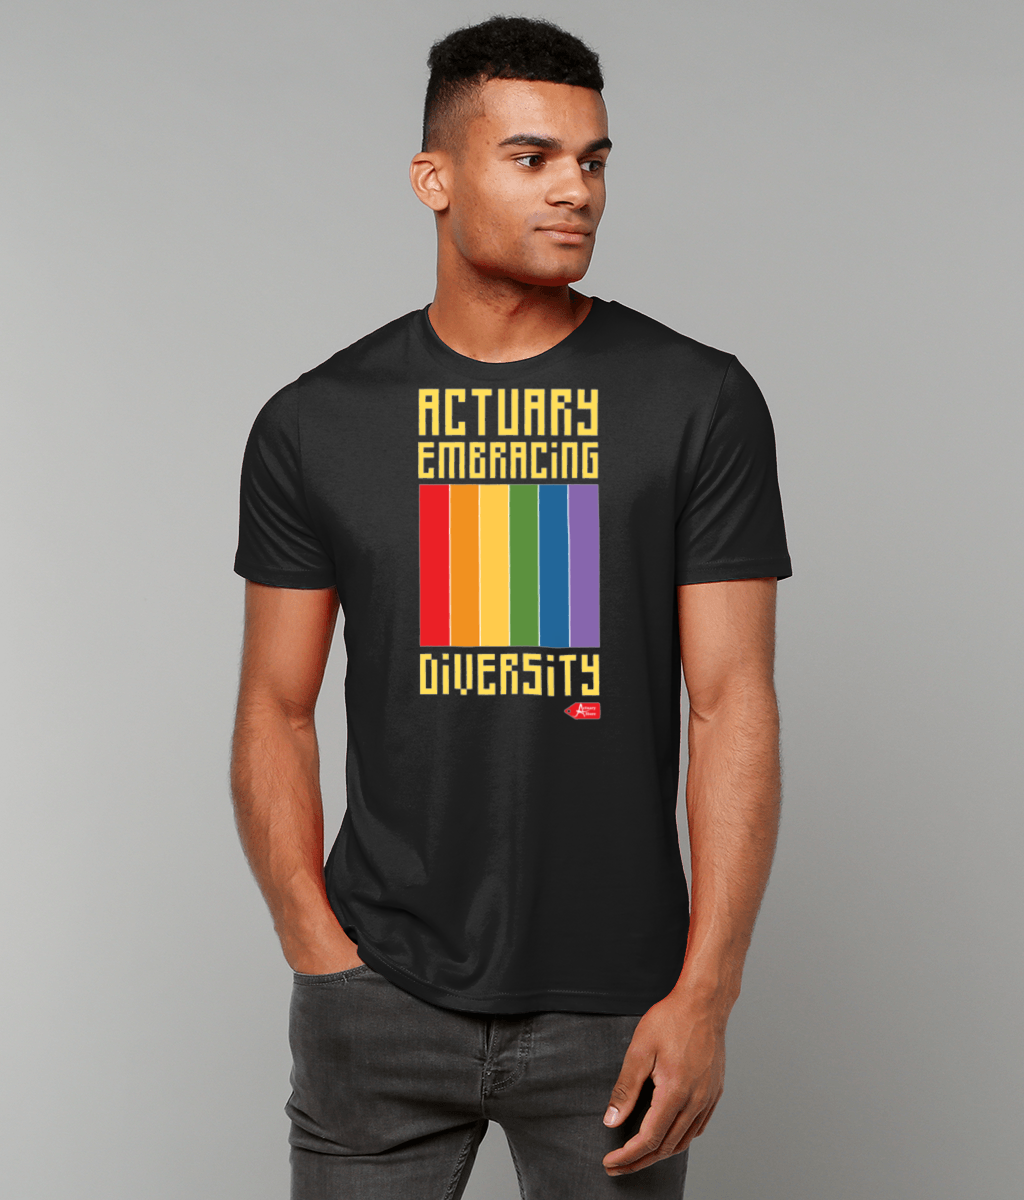 Actuary Embracing Diversity T-Shirt (Black and White Variants)